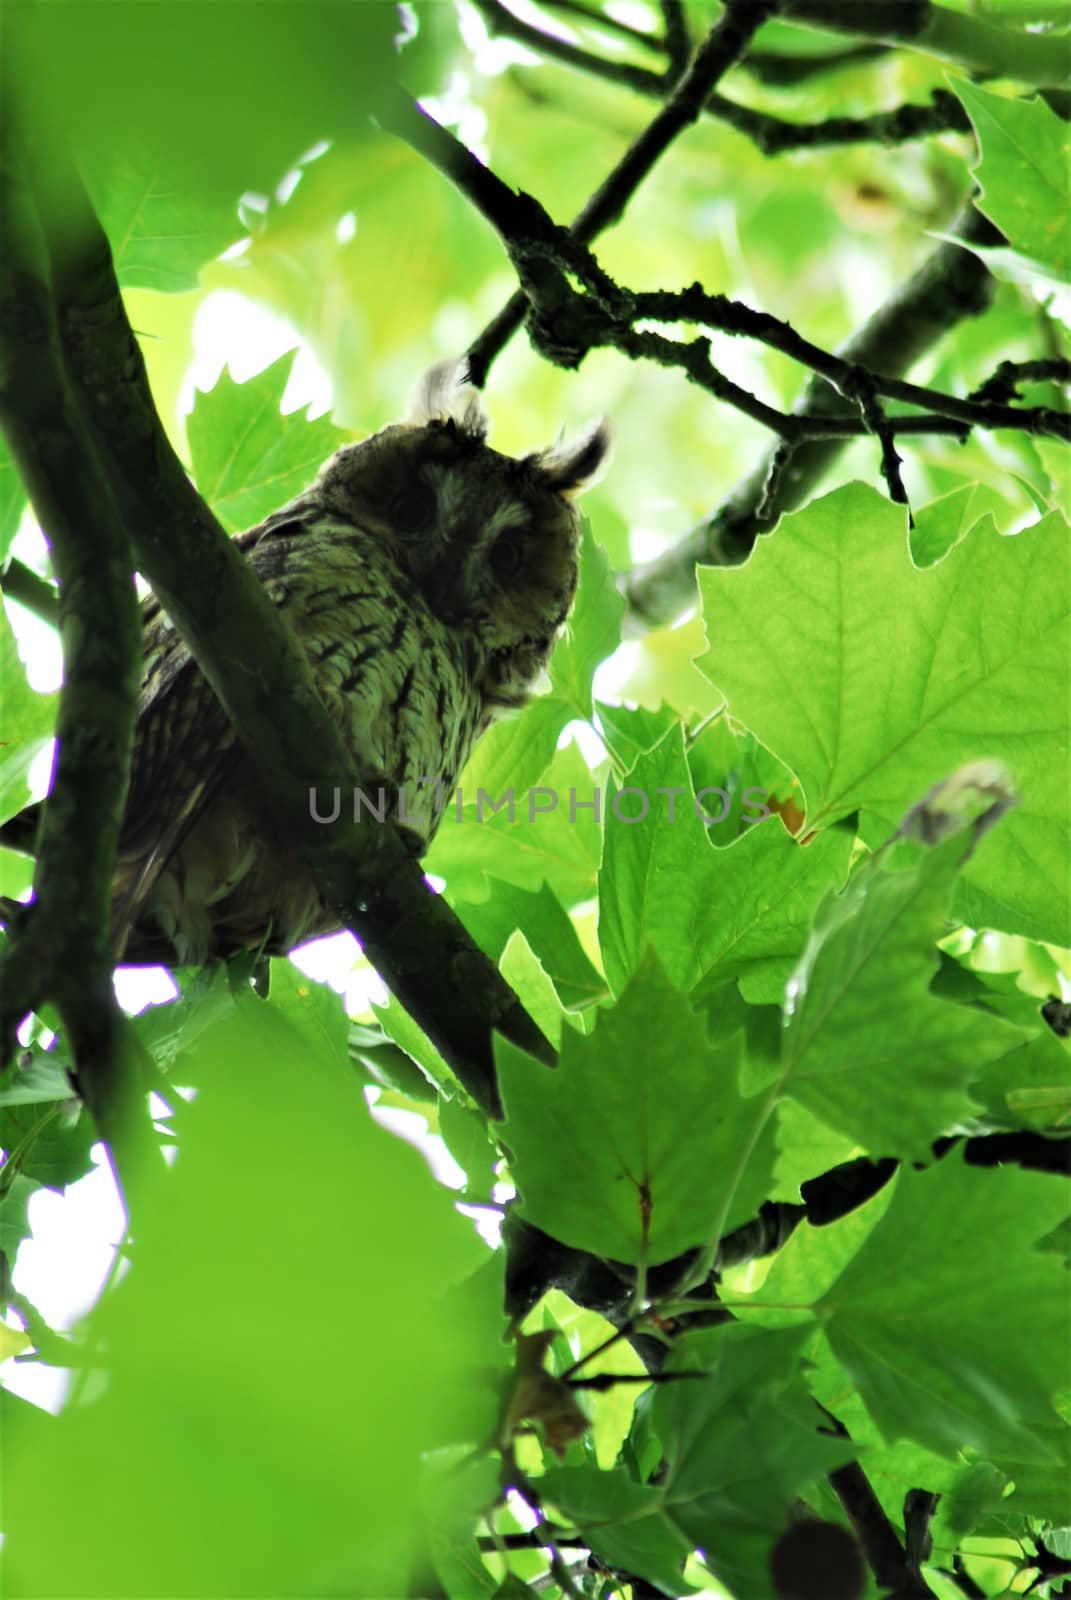 A tawny owl sits in the foliage of the plane tree